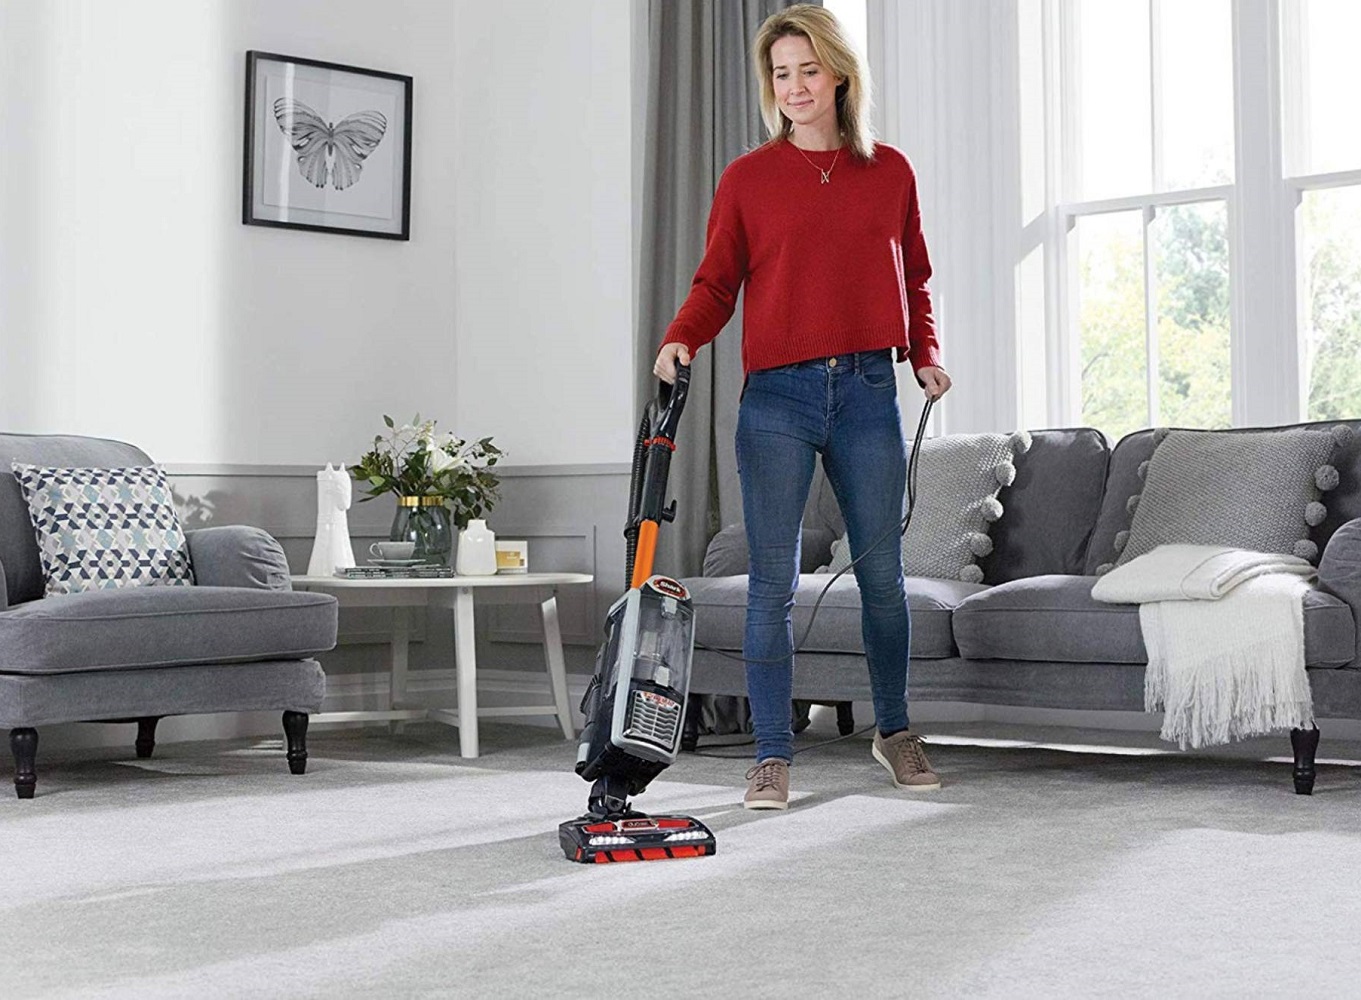 7 Best Upright Vacuum Cleaners for May 2022